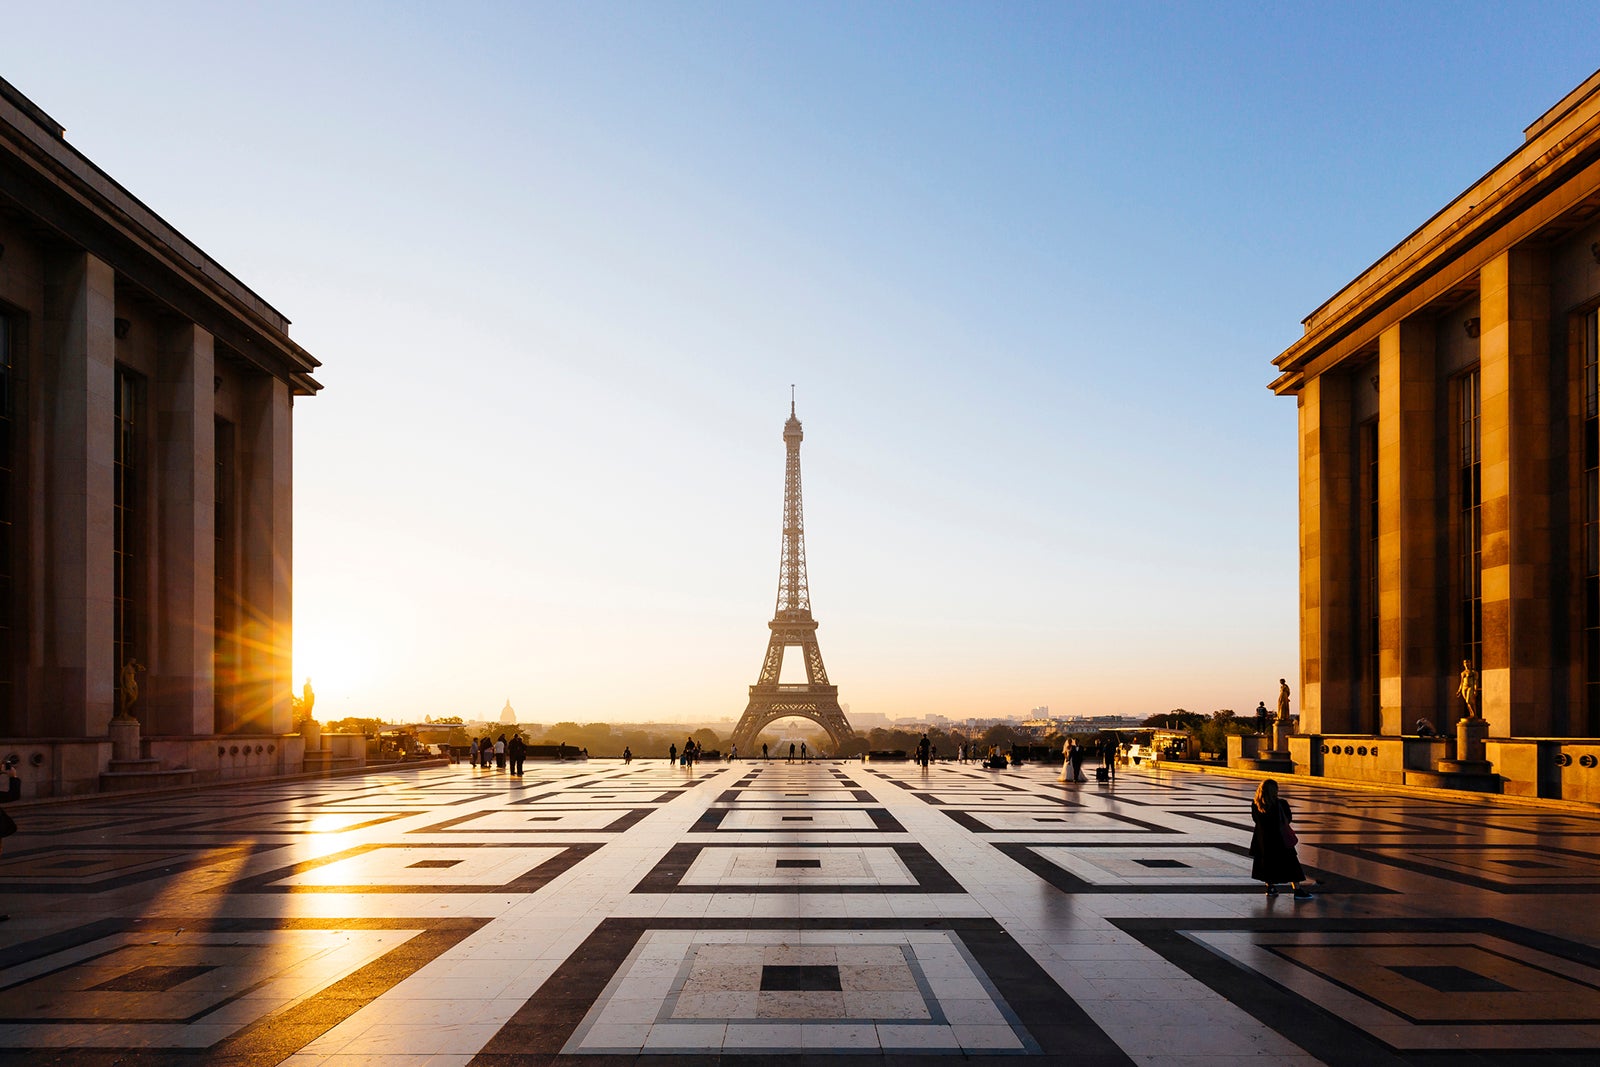 Eiffel Tower and Trocadero square during sunrise, Paris, France